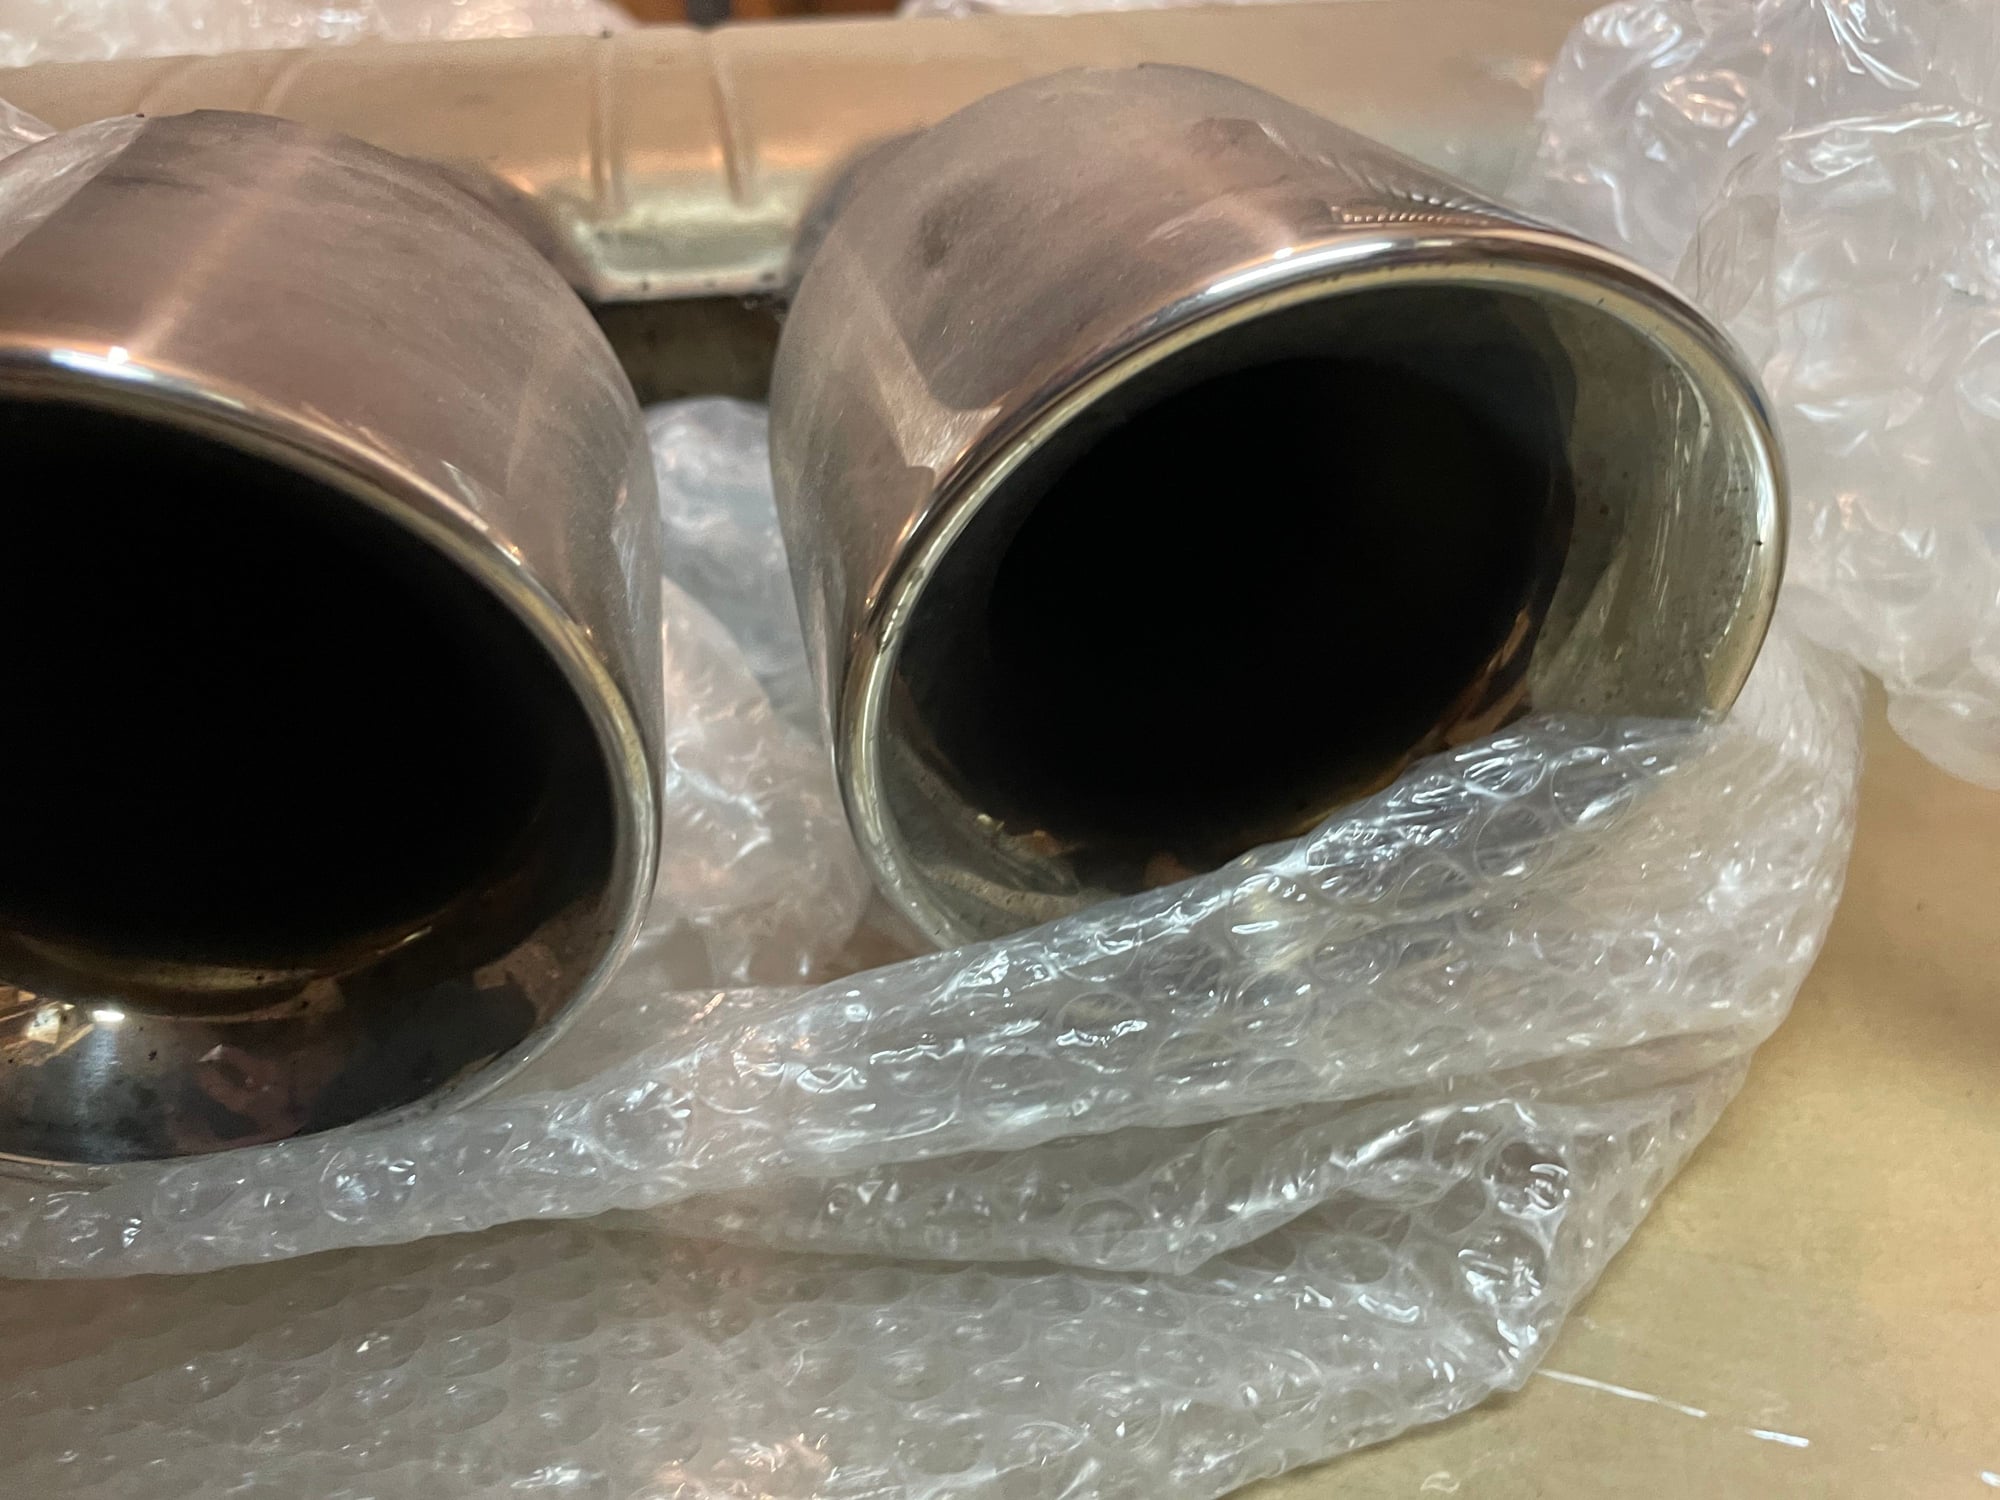 Engine - Exhaust - 2016 OEM F Type S Active Exhaust + OEM Front Grill - Used - 2016 Jaguar F-Type - San Francisco, CA 94110, United States